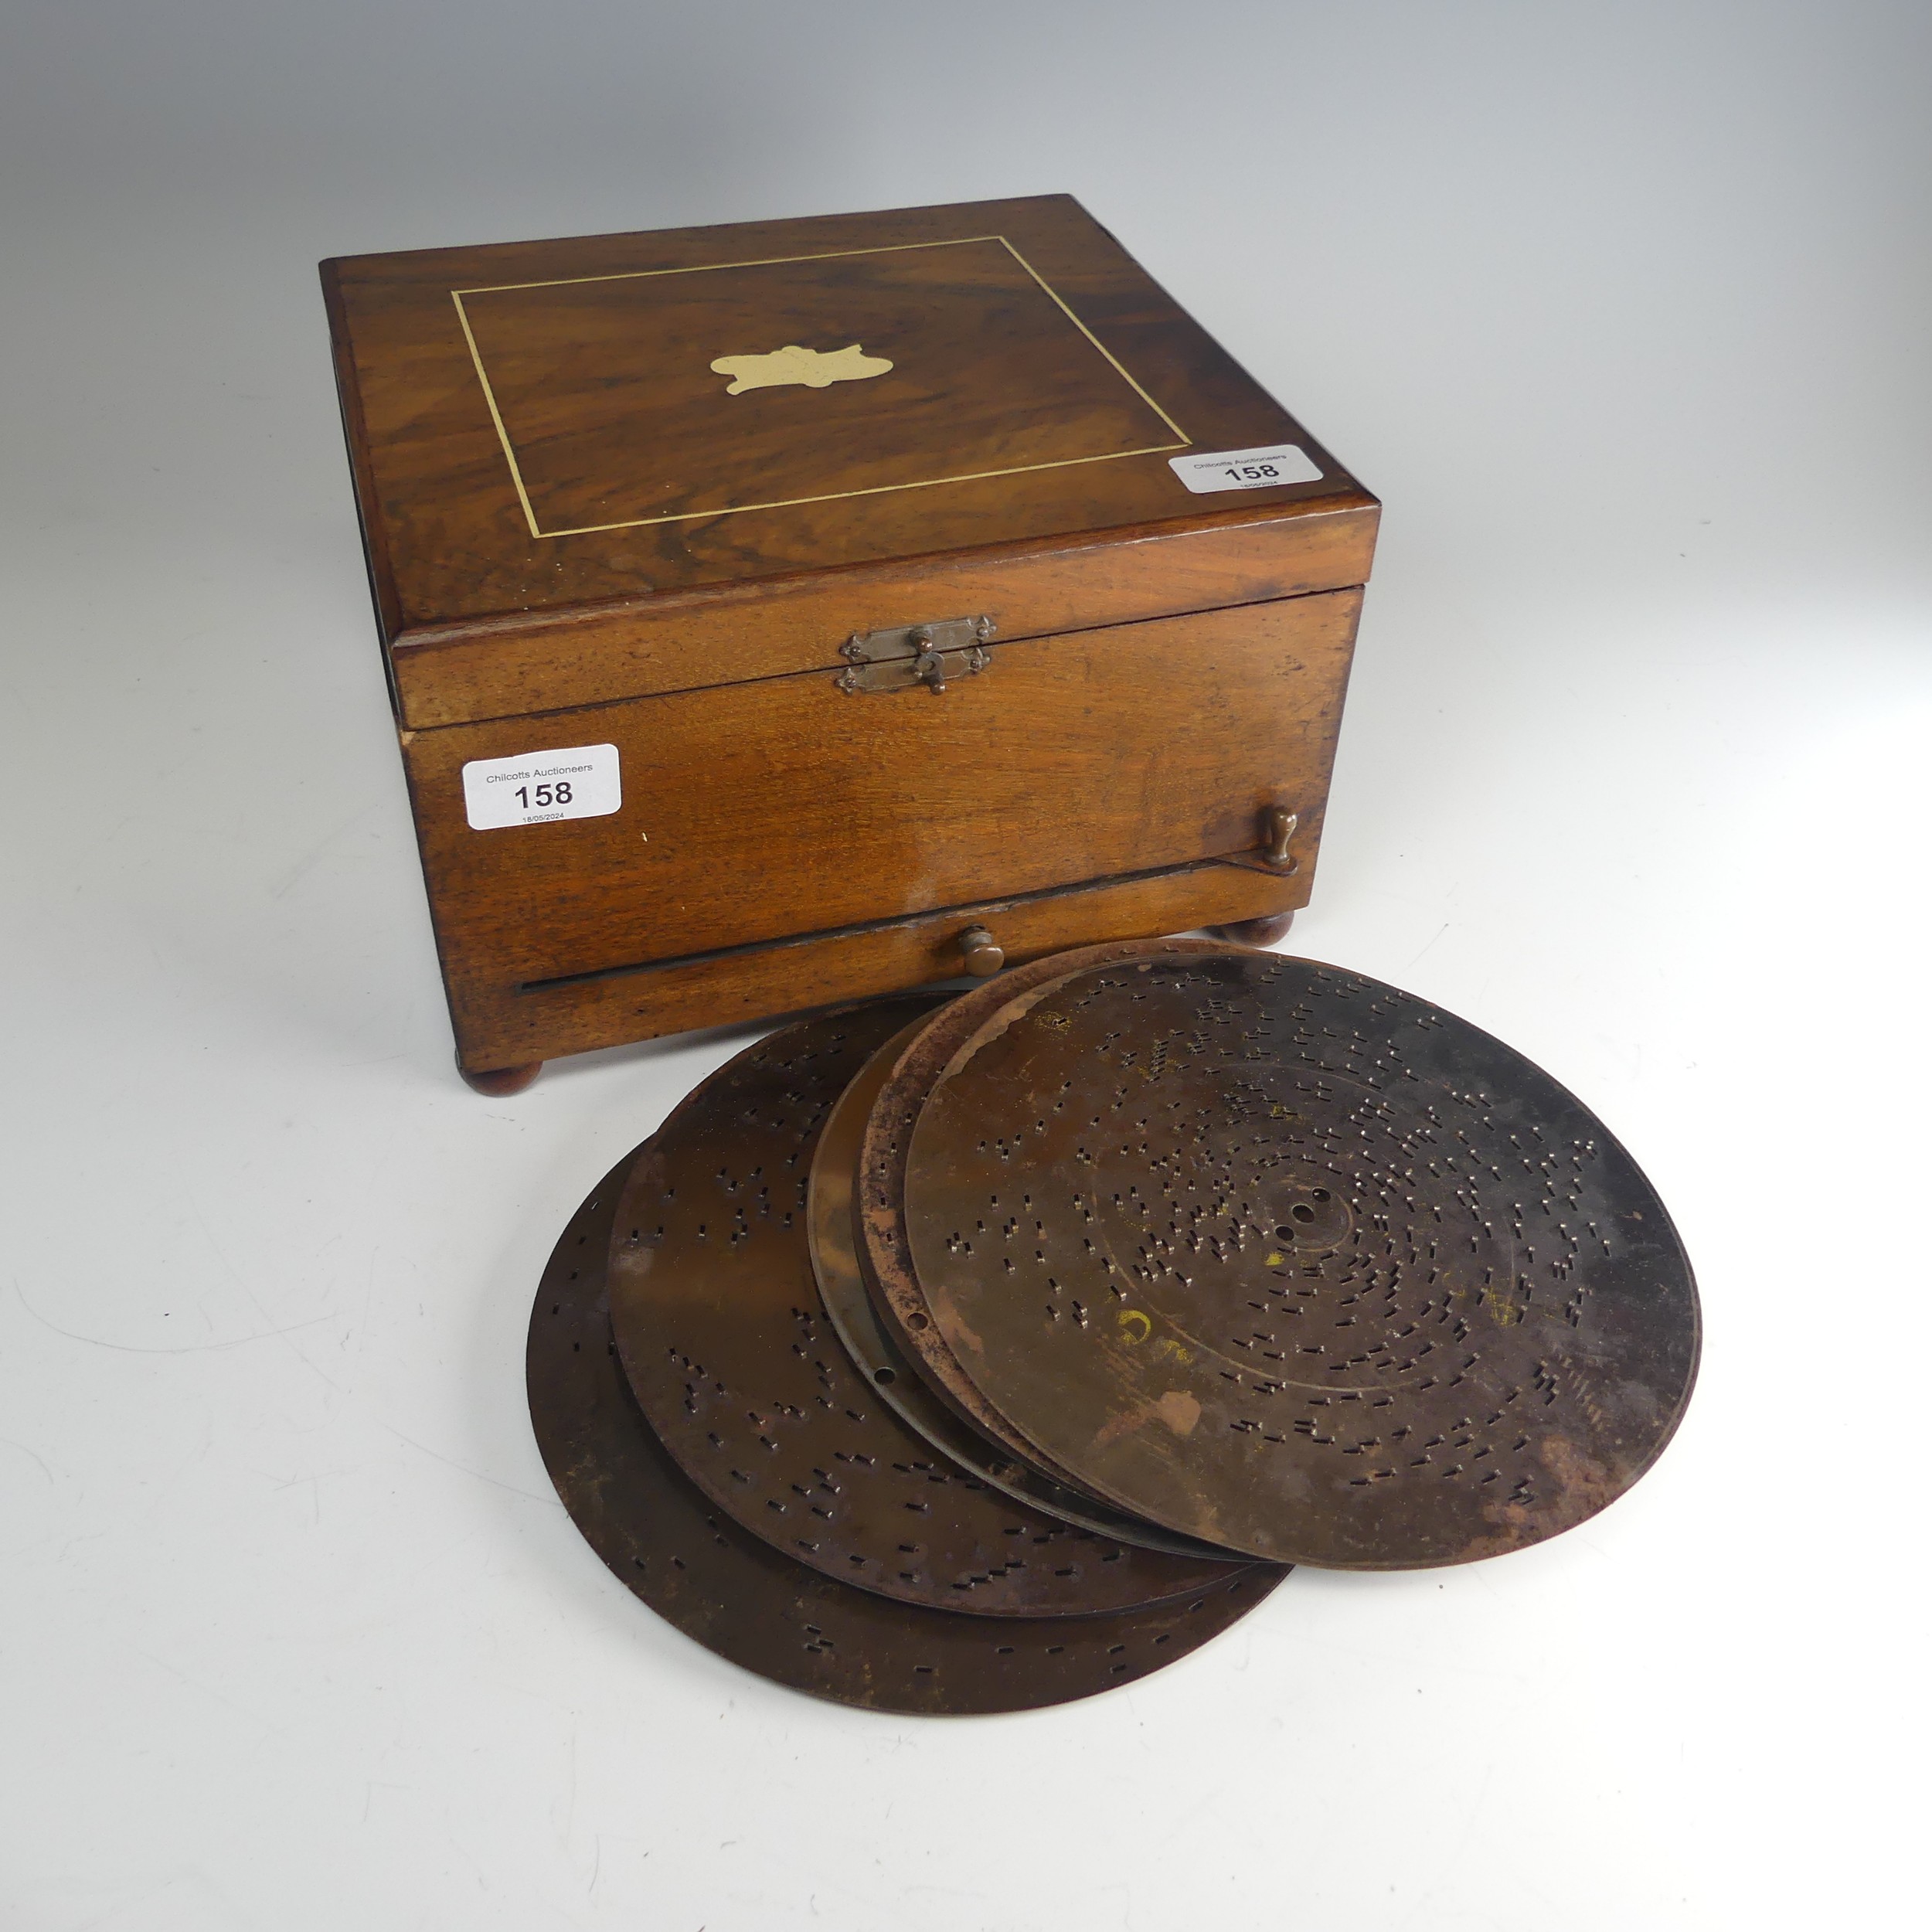 A late 19th century walnut cased Polyphon, with decorative hinged lid, the inside lid with - Image 4 of 6